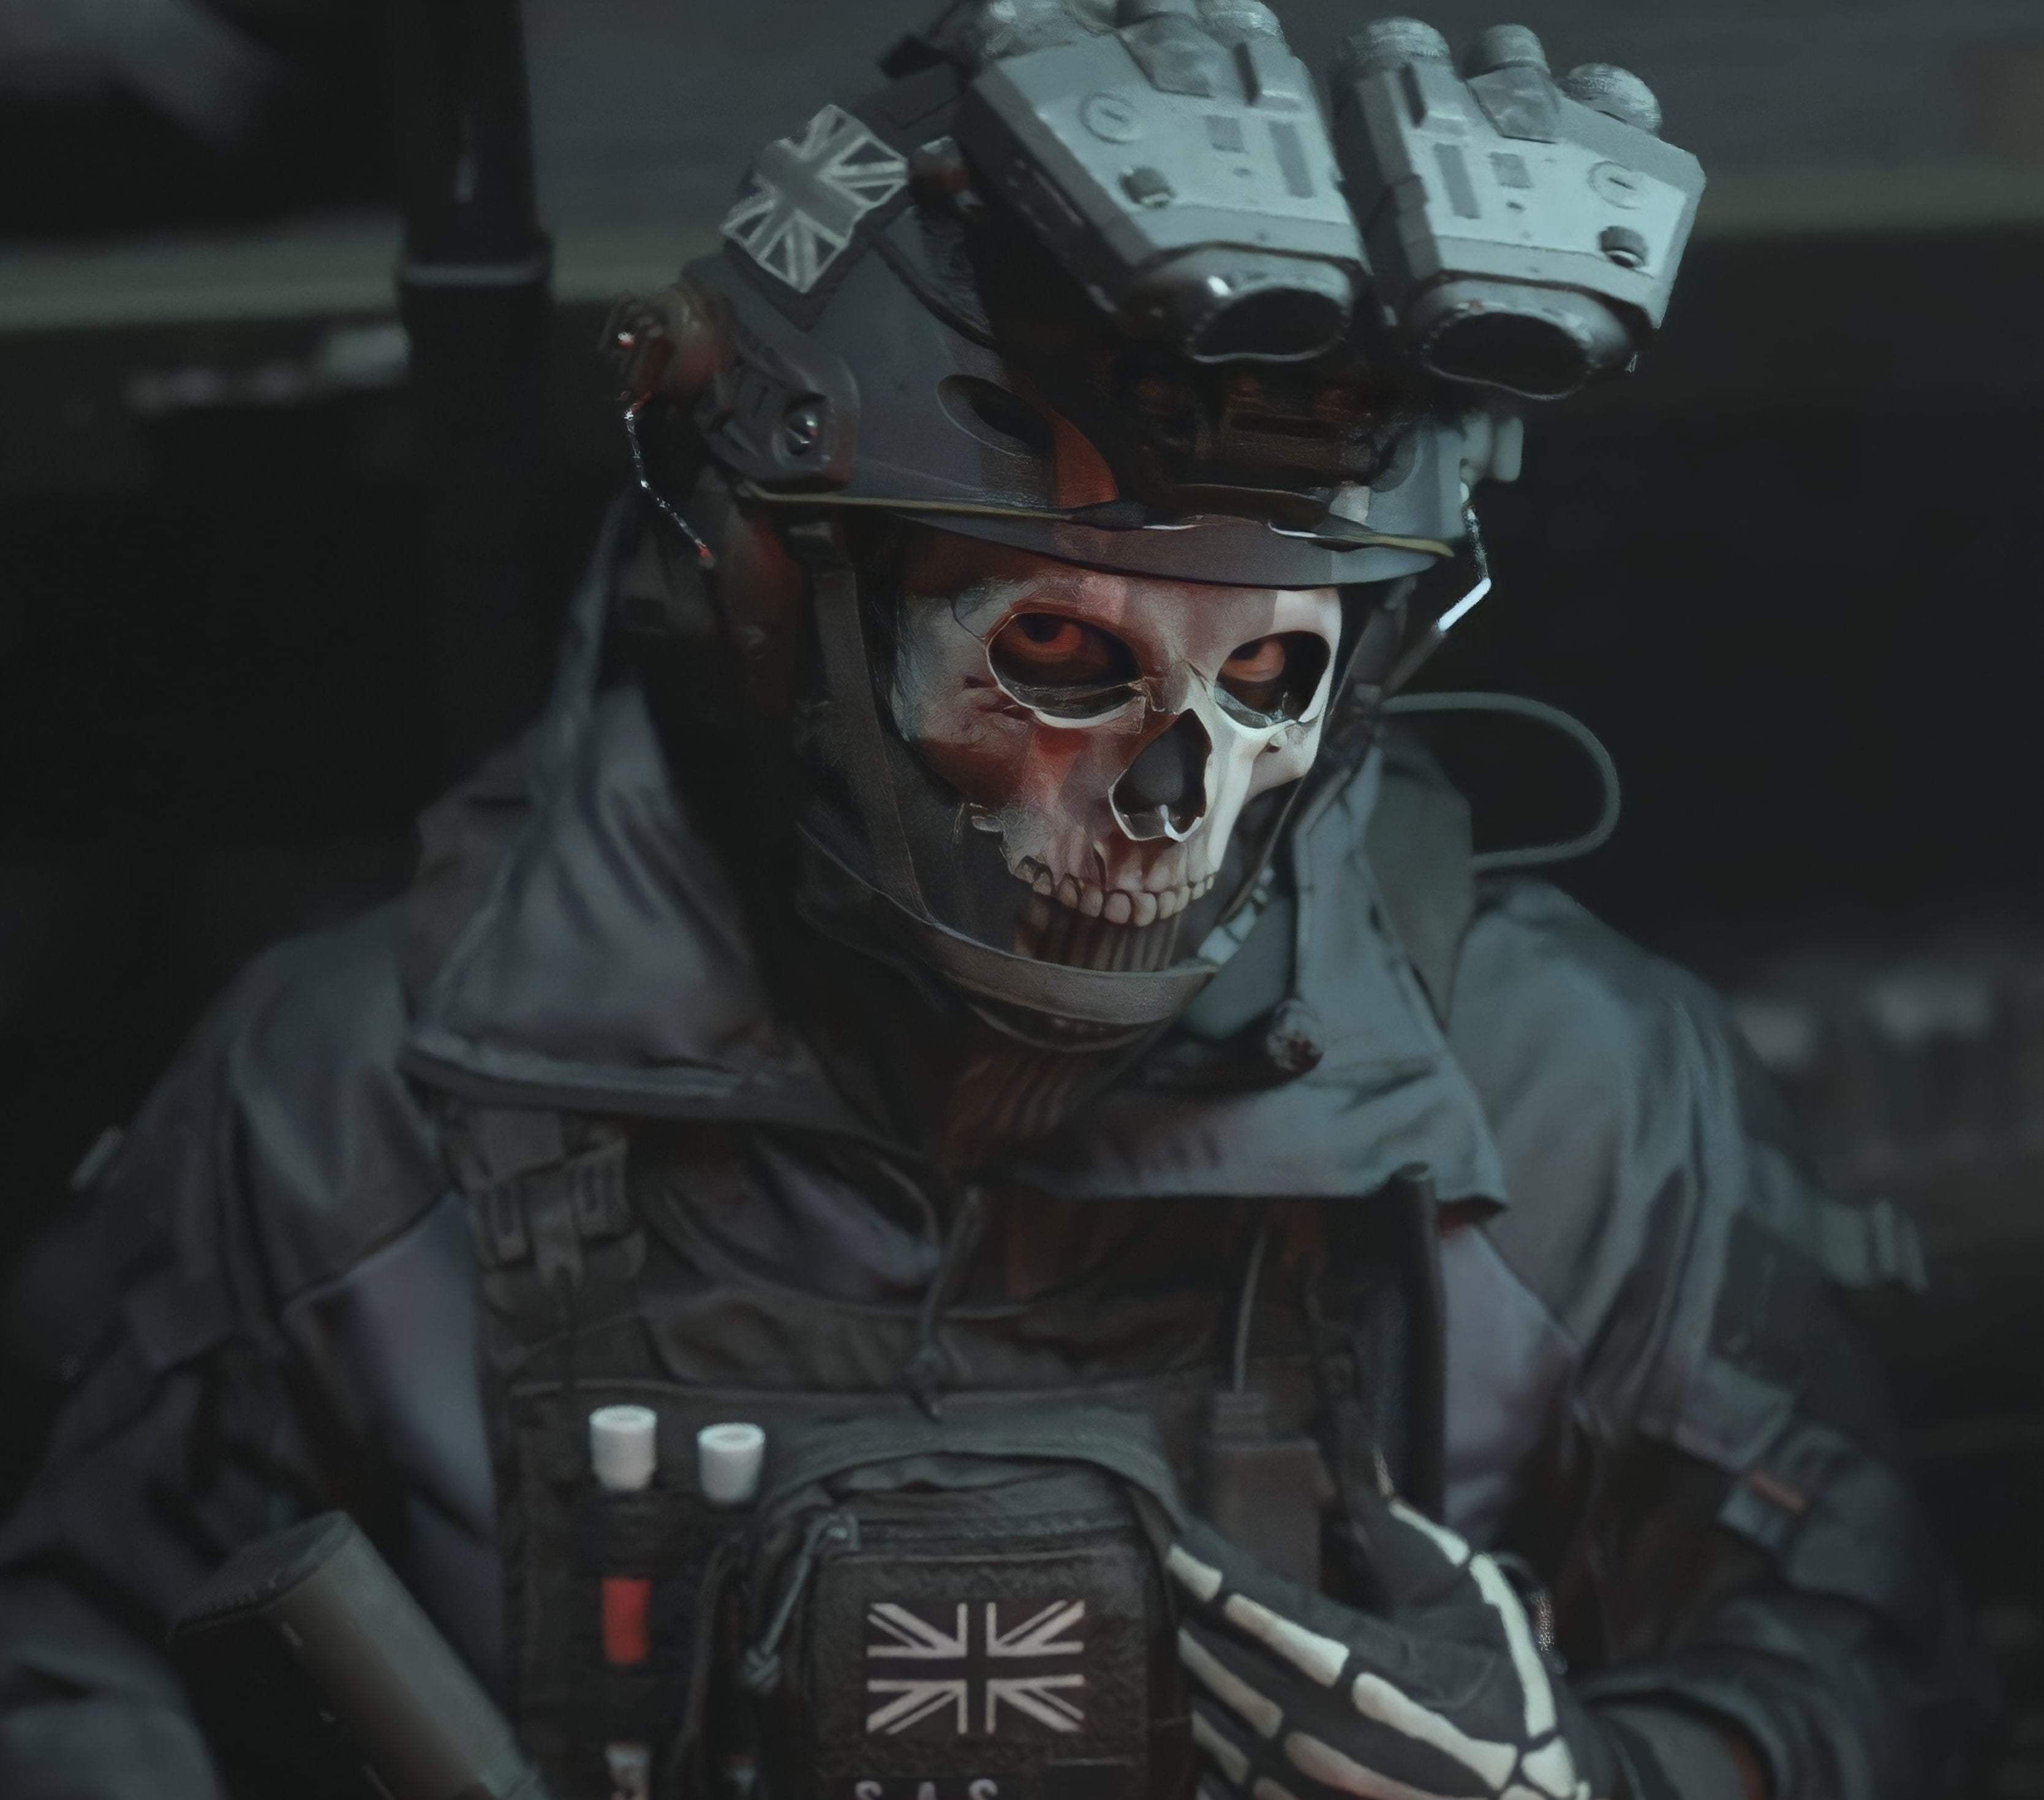 face mask, military, armor, Call of Duty, video game characters